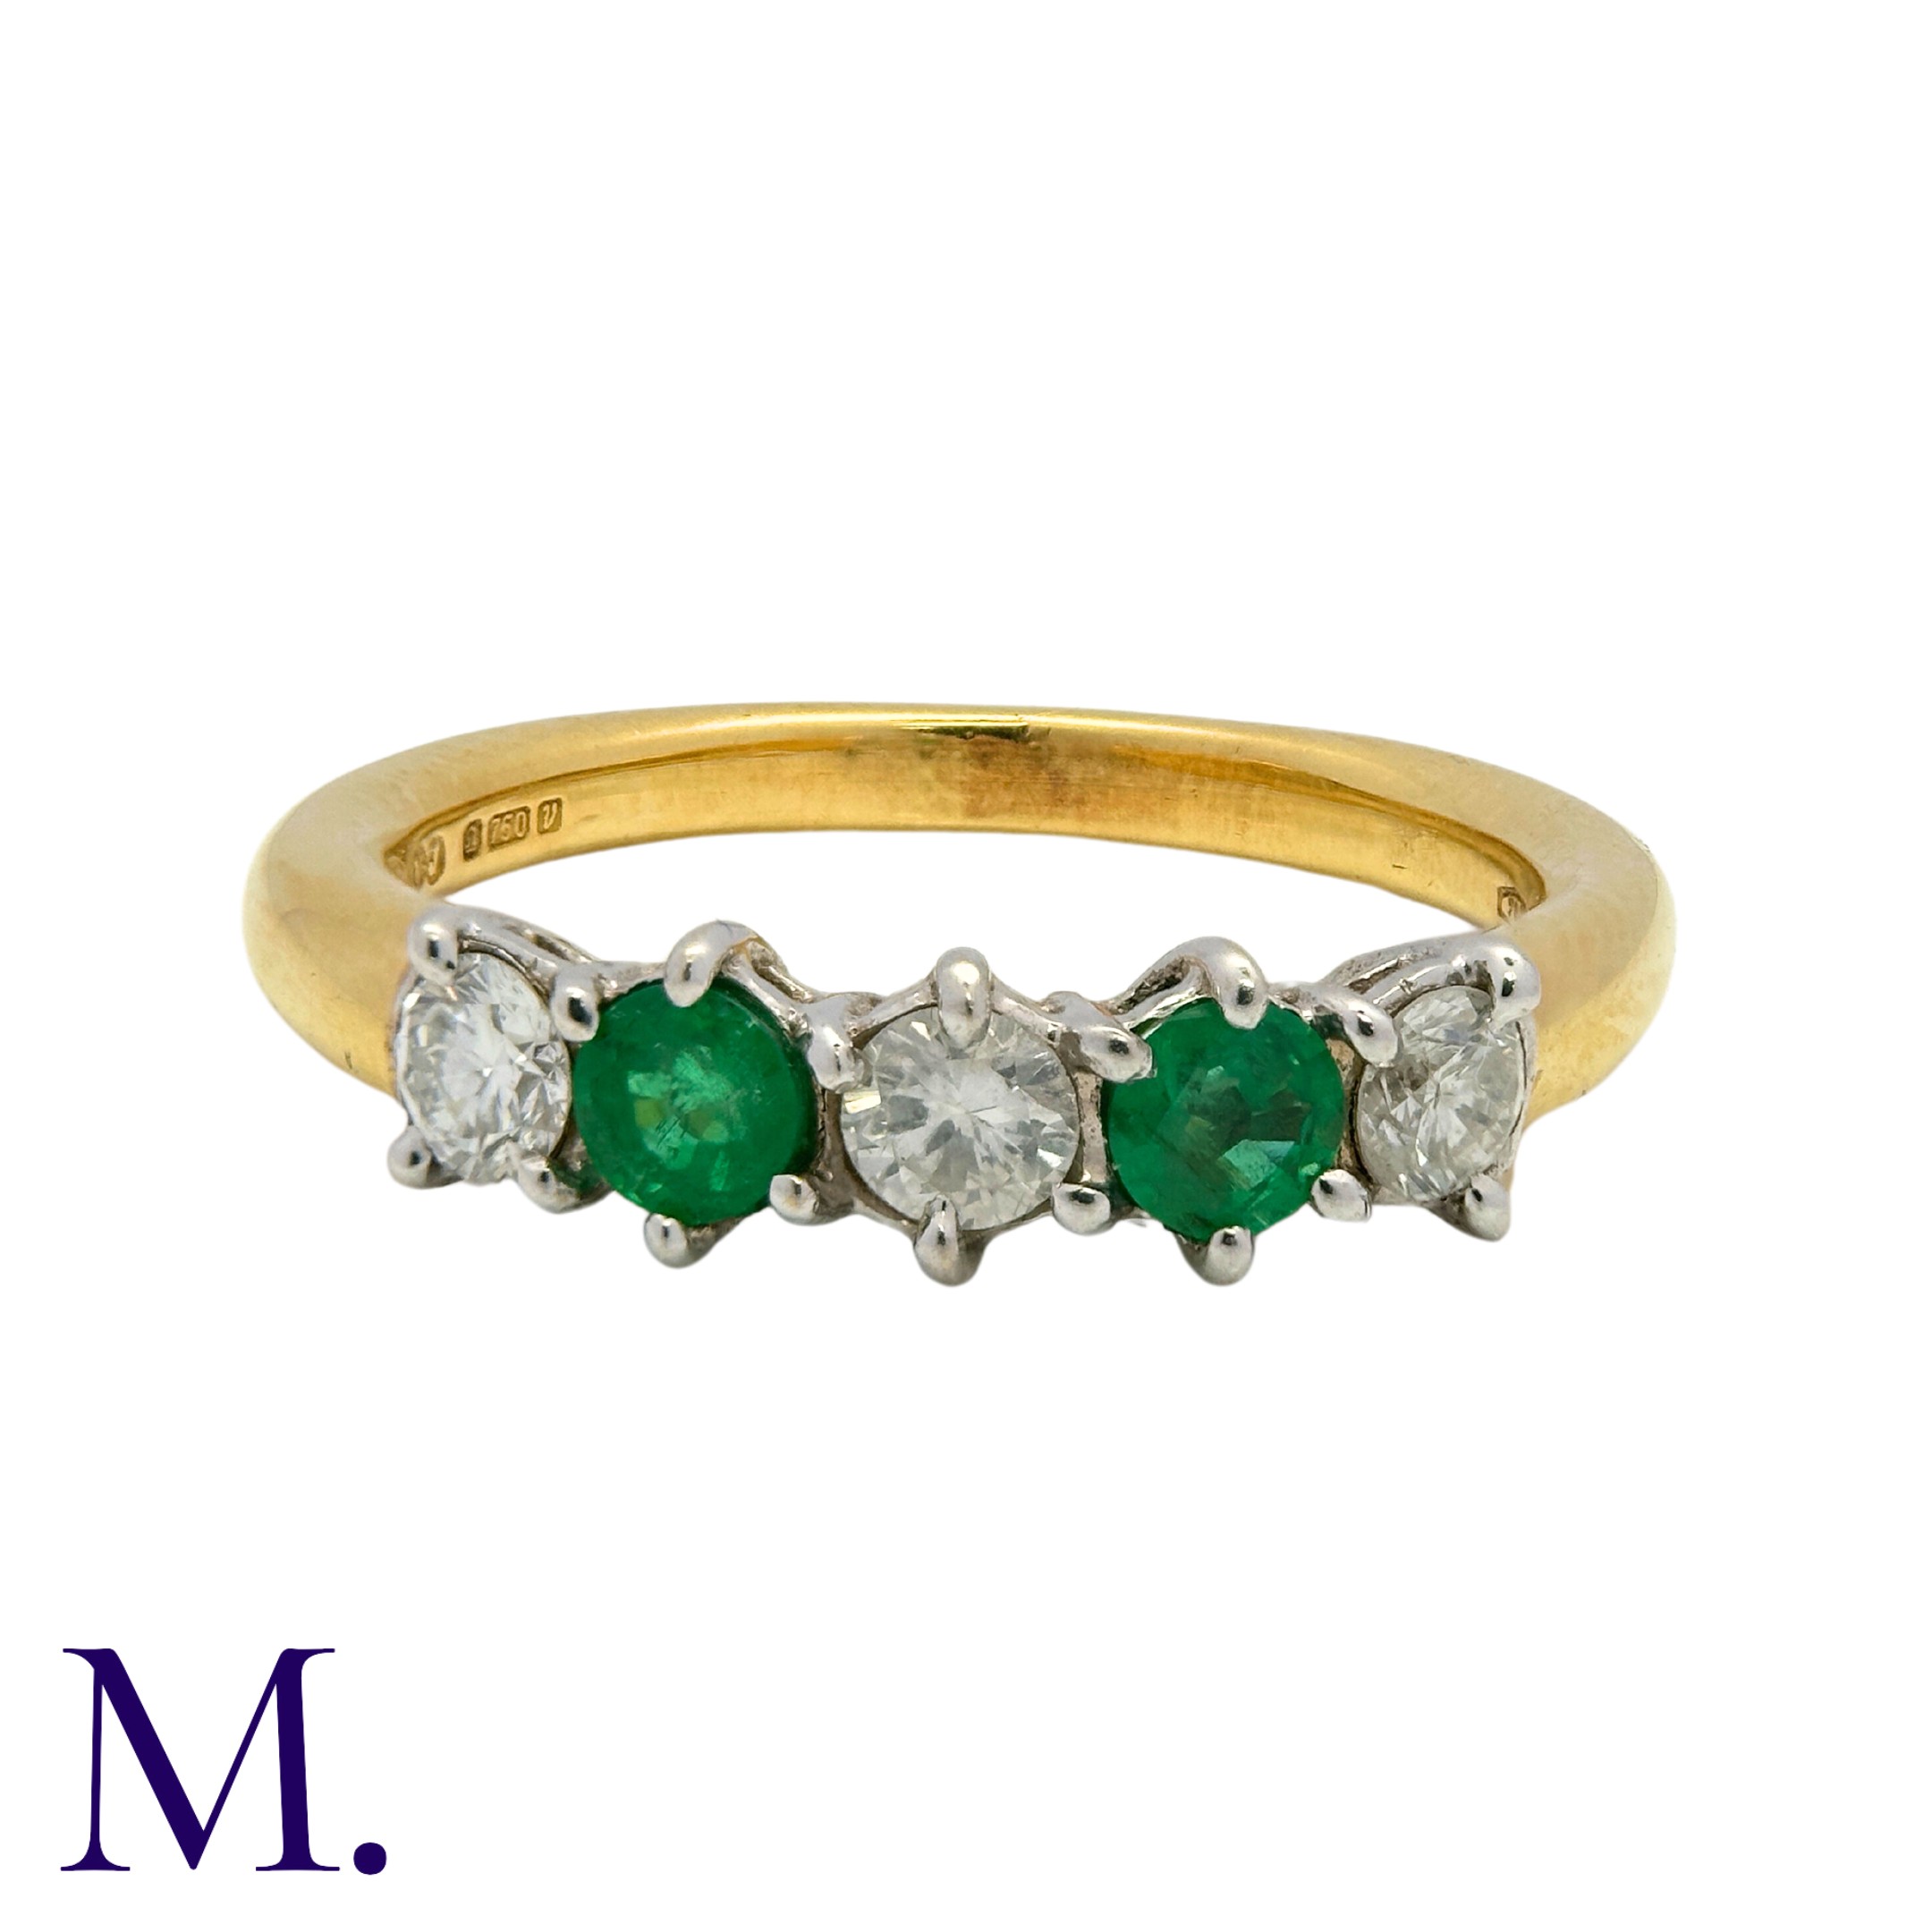 An Emerald and Diamond 5-Stone Ring in 18K yellow and white gold, set with three round cut - Image 2 of 3